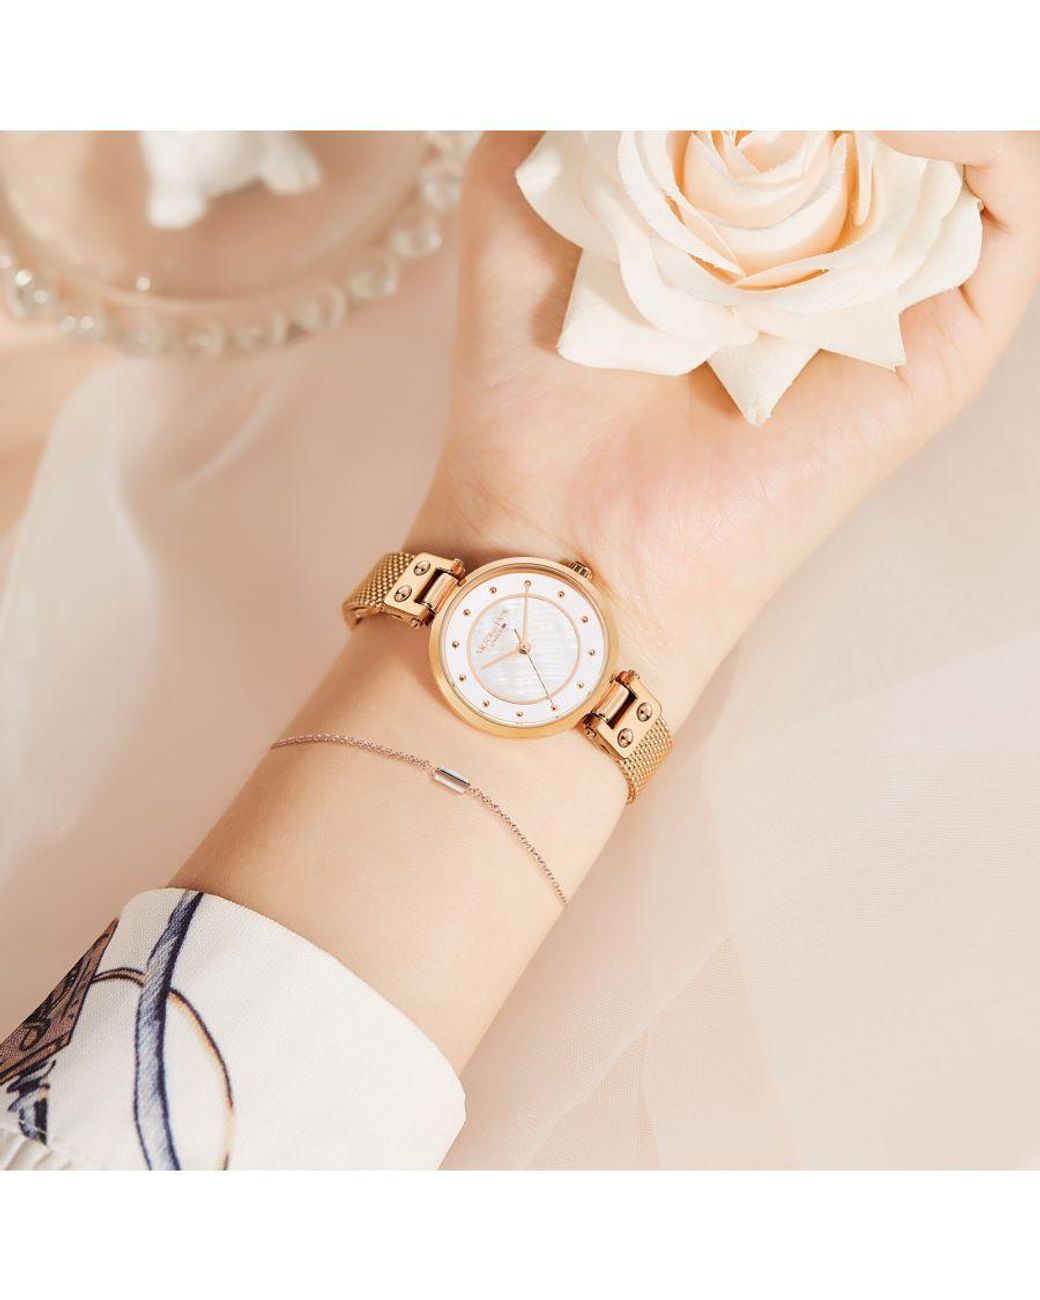 Victoria Hyde London Watch Gift Princess Charlotte Rosegold Stainless Steel  in White | Lyst UK